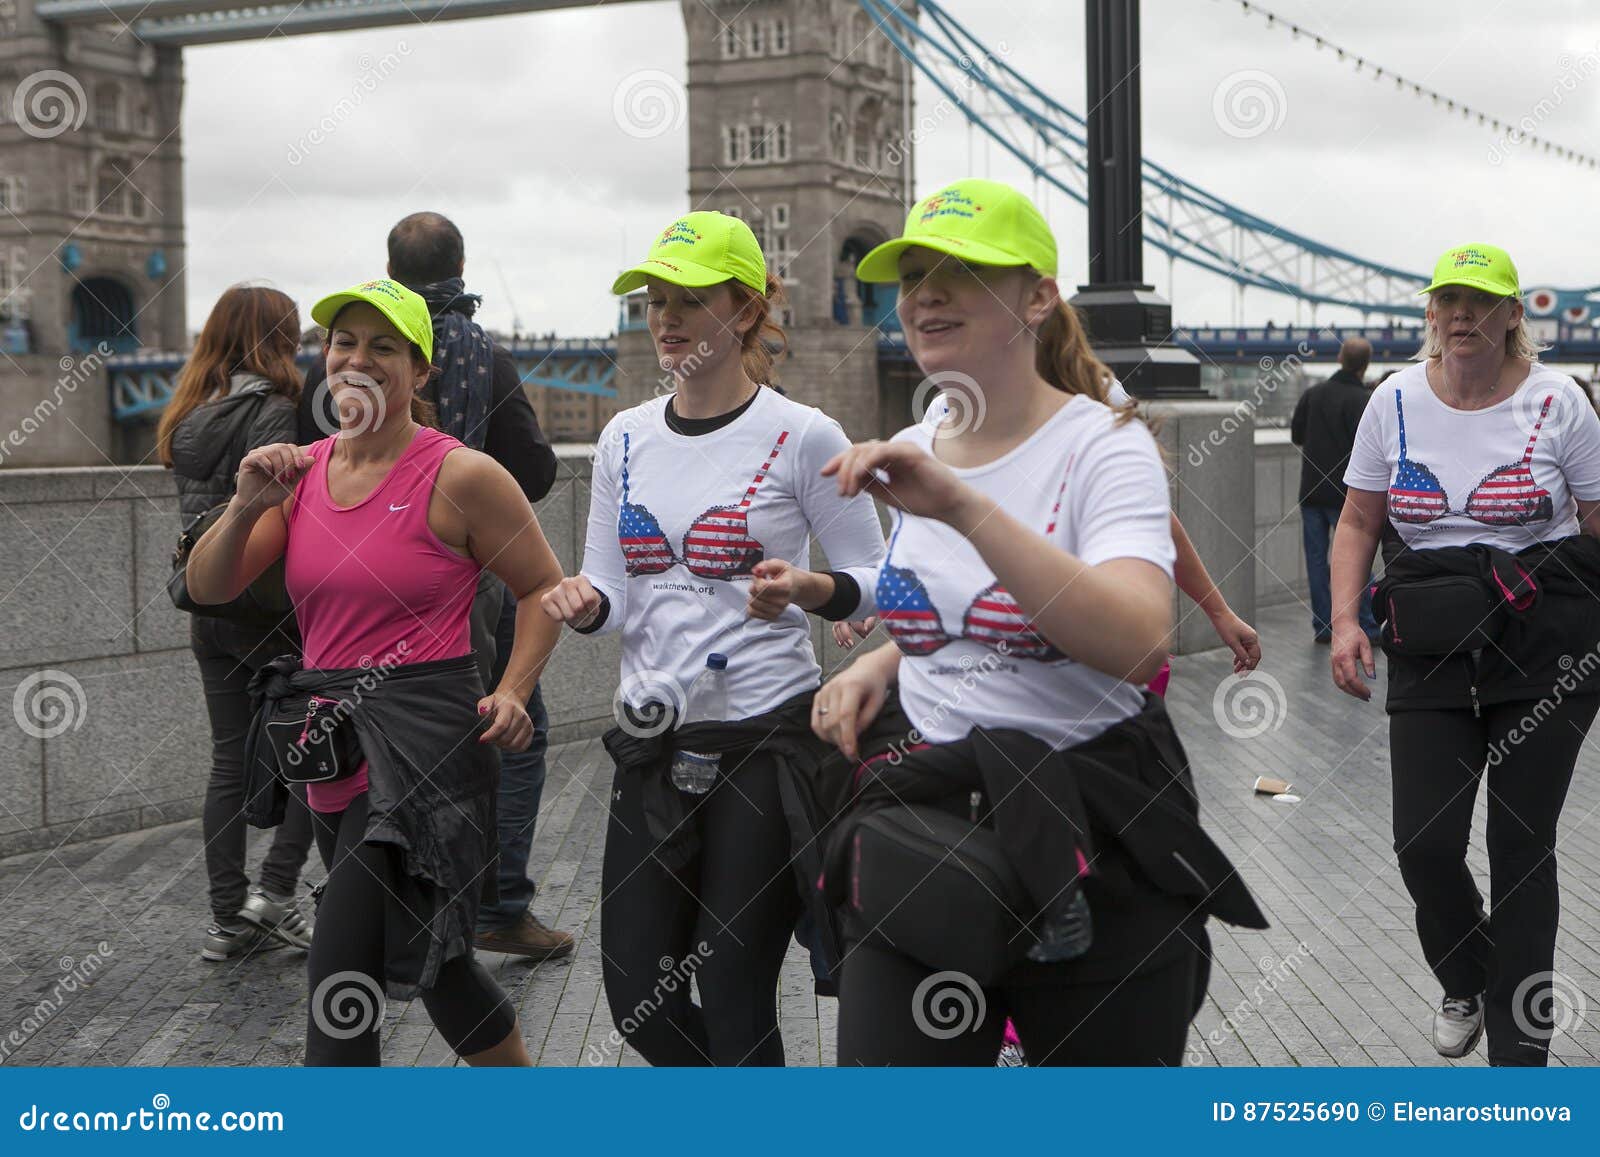 https://thumbs.dreamstime.com/z/girls-wear-t-shirts-printed-bras-running-hold-rally-support-breast-cancer-patients-south-bank-london-uk-april-pgirls-87525690.jpg